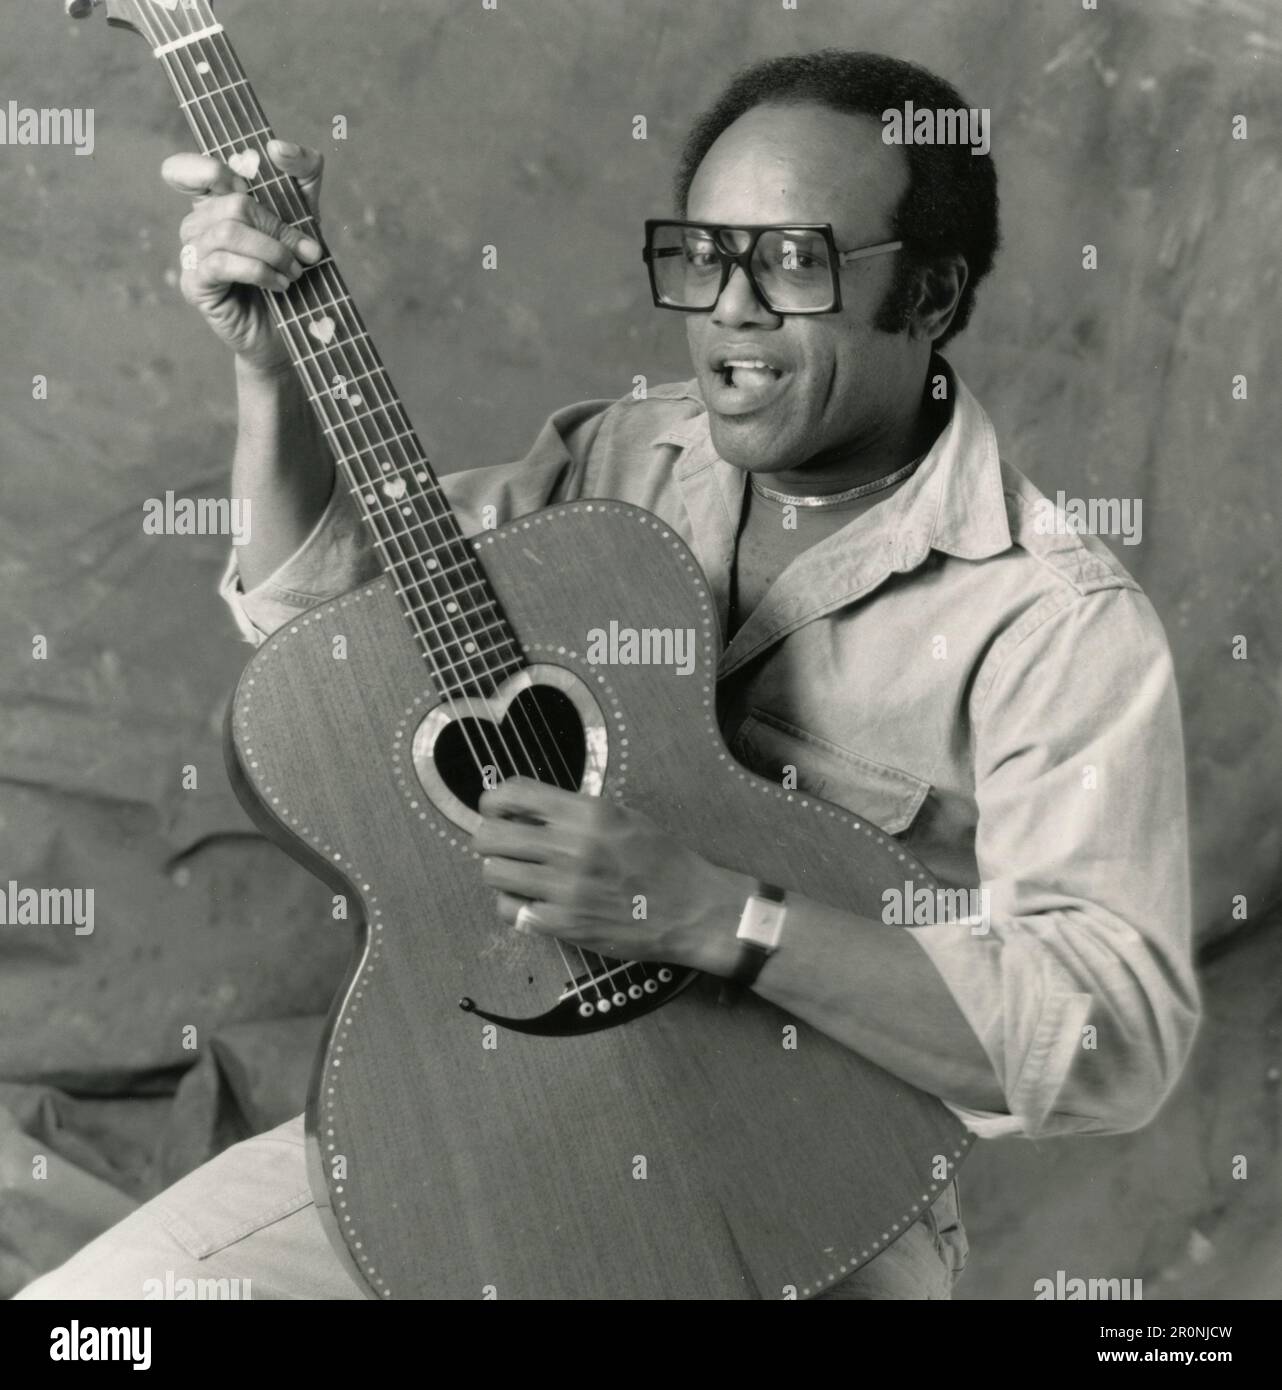 American singer, songwriter, musician and record producer Bobby Womack, USA 1980s Stock Photo